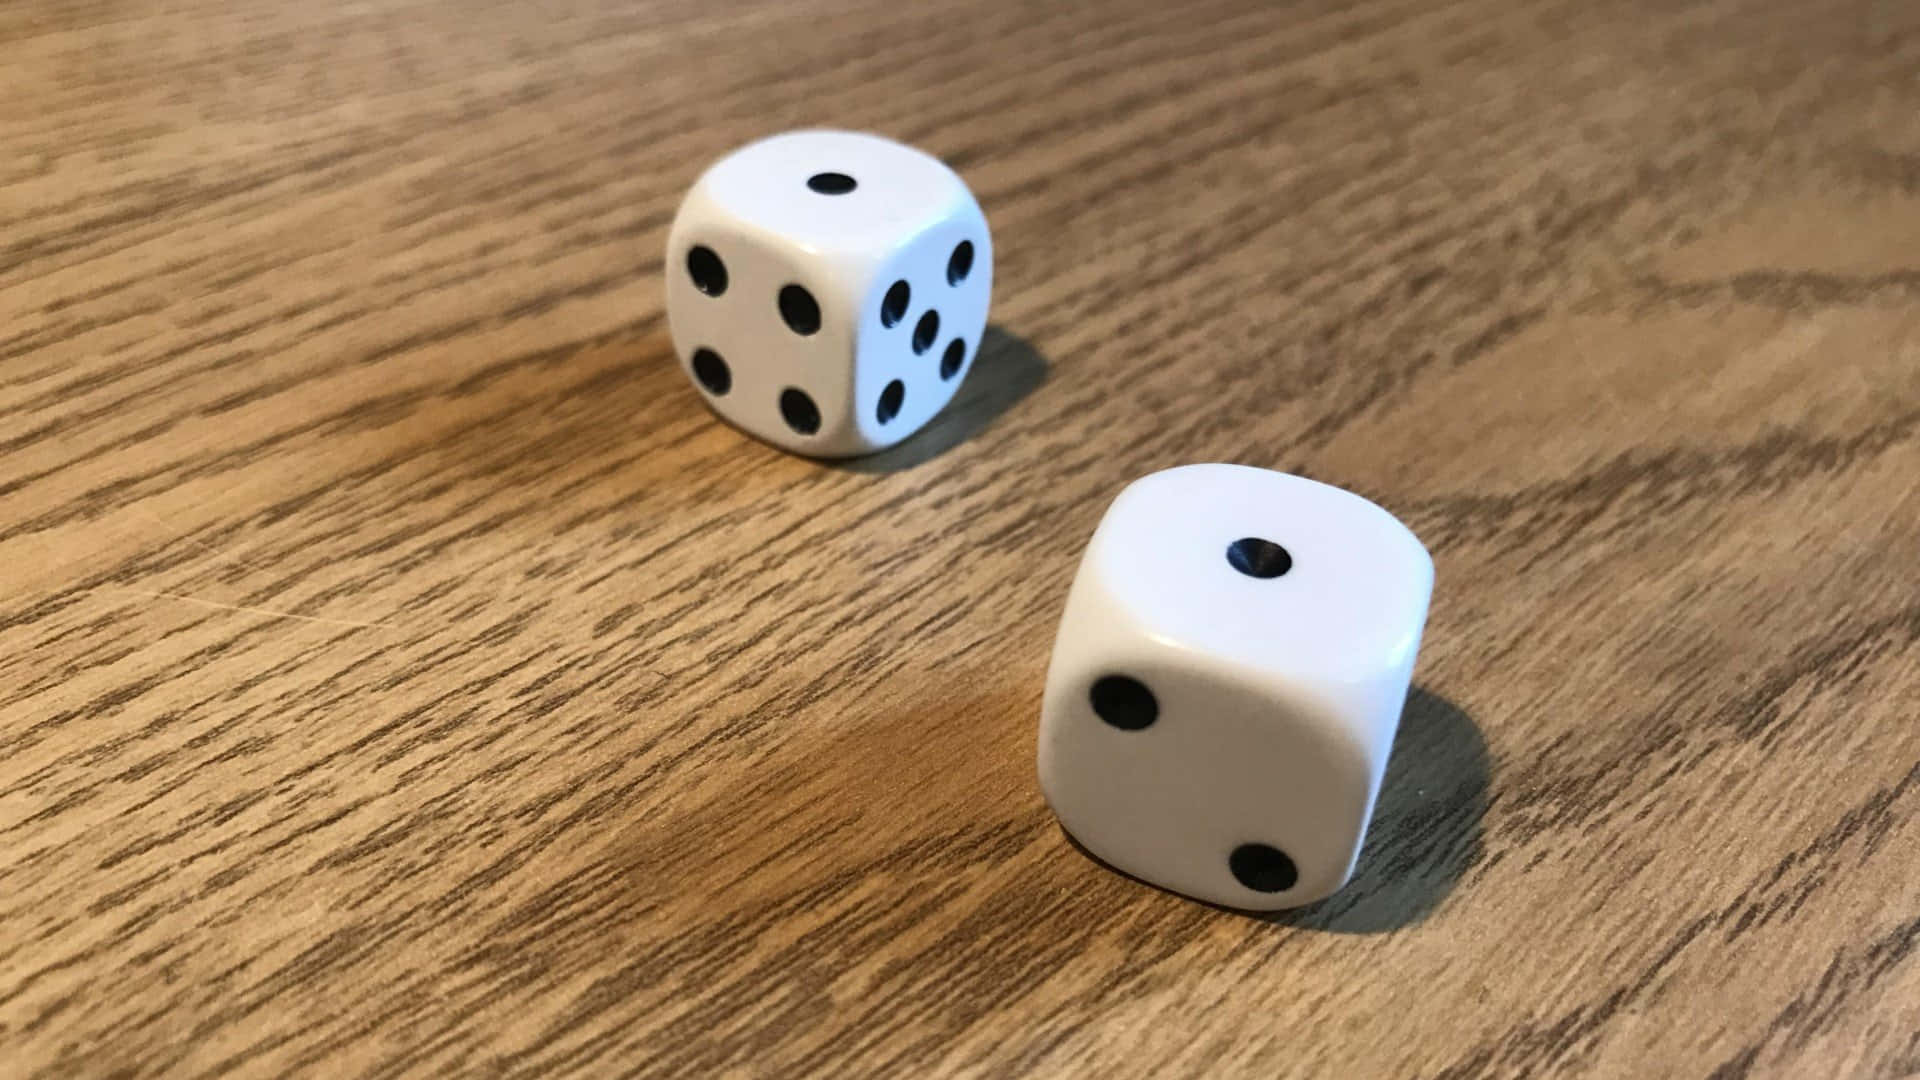 Two Dice On A Wooden Table